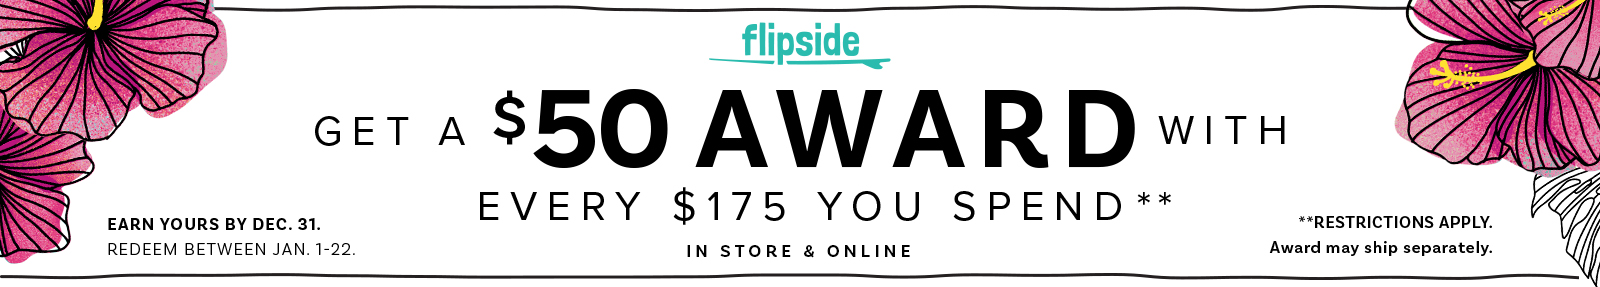 Flipside - Get a $50 award with every $175 you spend**